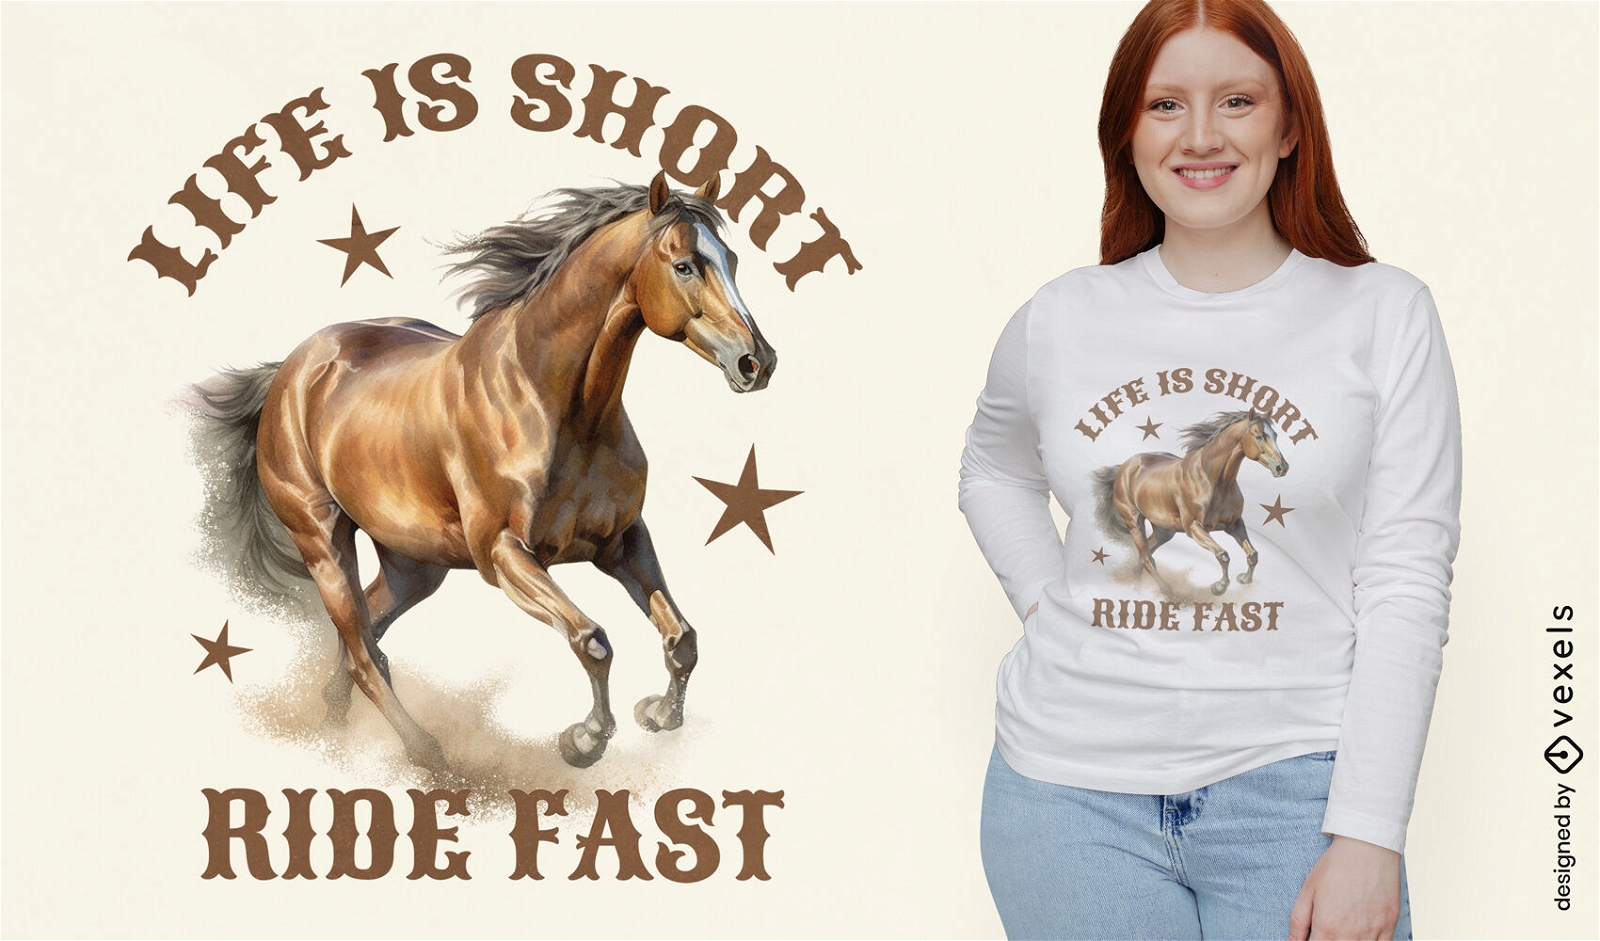 Galloping horse quote t-shirt design